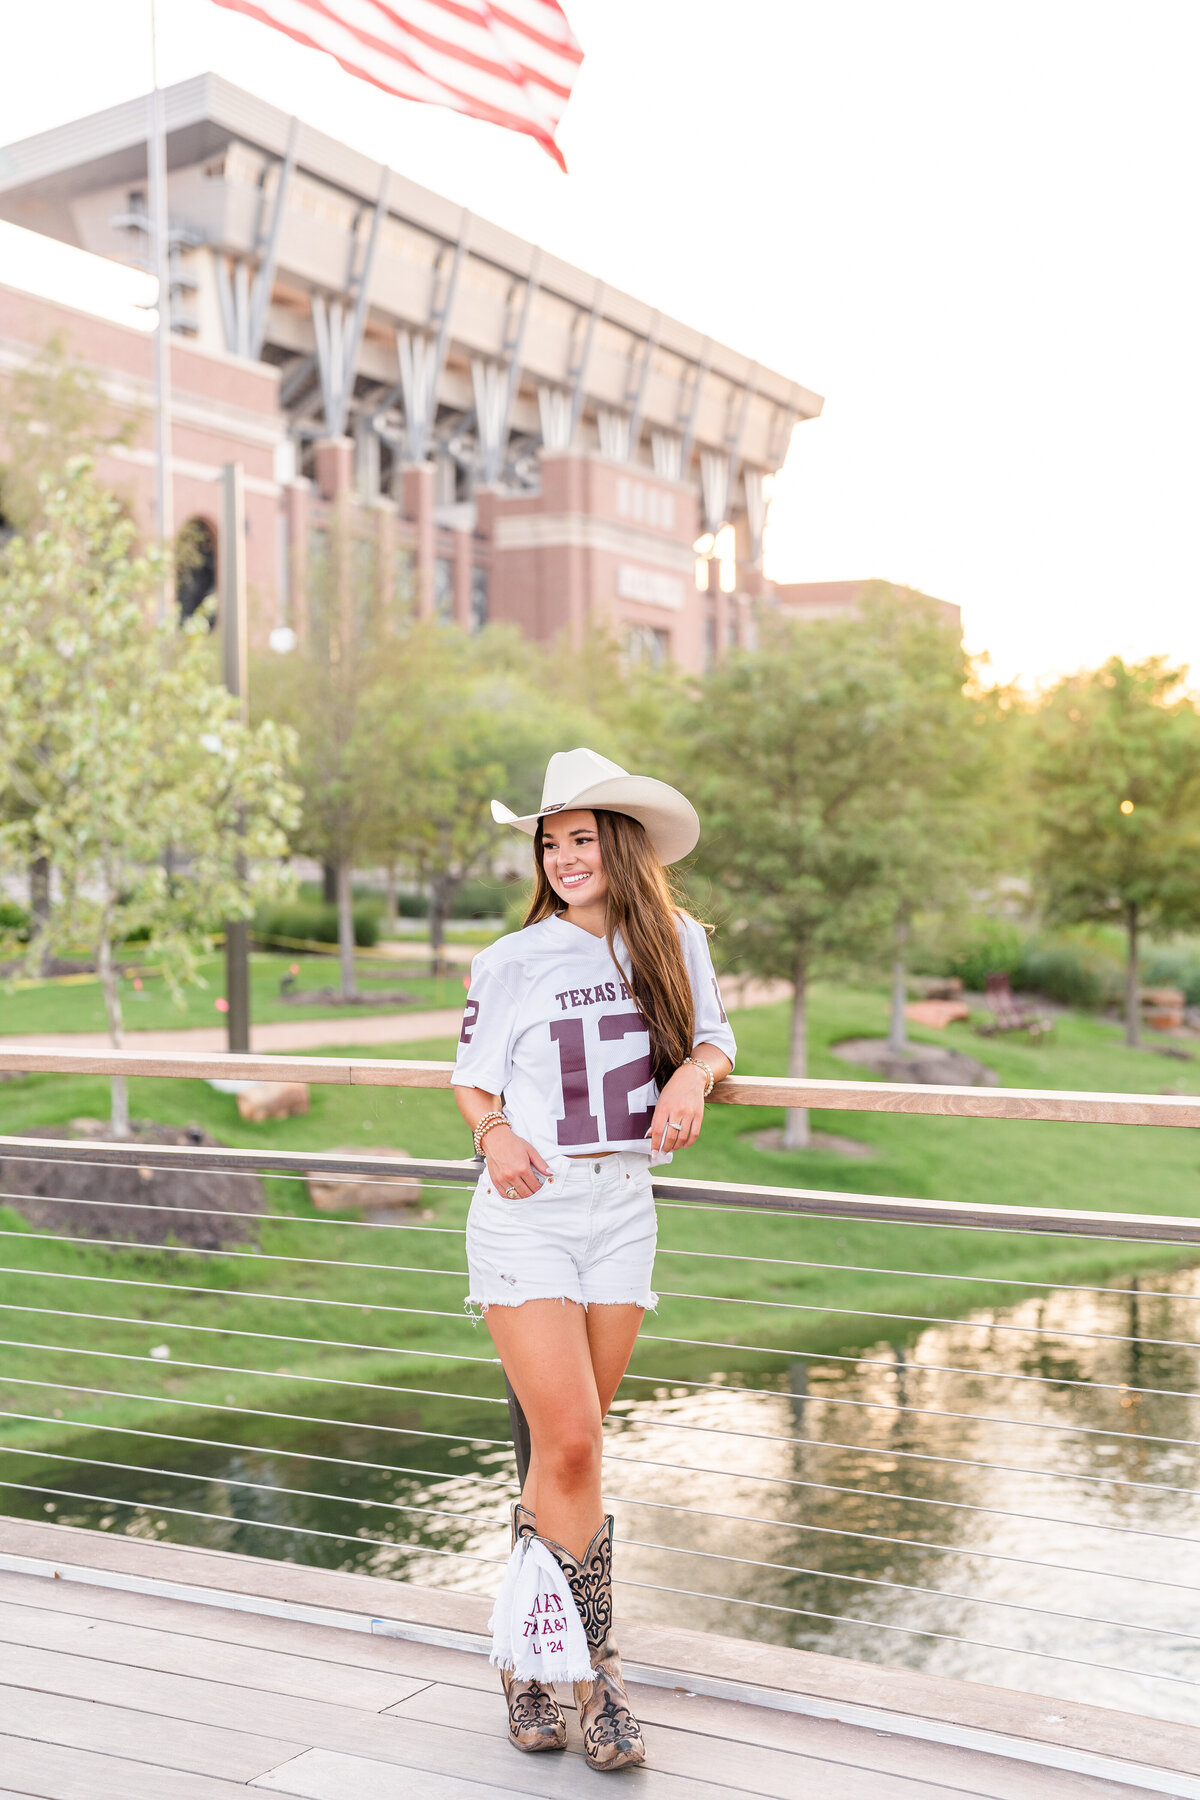 Texas A&M senior girl leaning on bridge railing with other hand in pocket while wearing white jersey, shorts and cowboy hat and smiling away in front of Kyle Field in Aggie Park